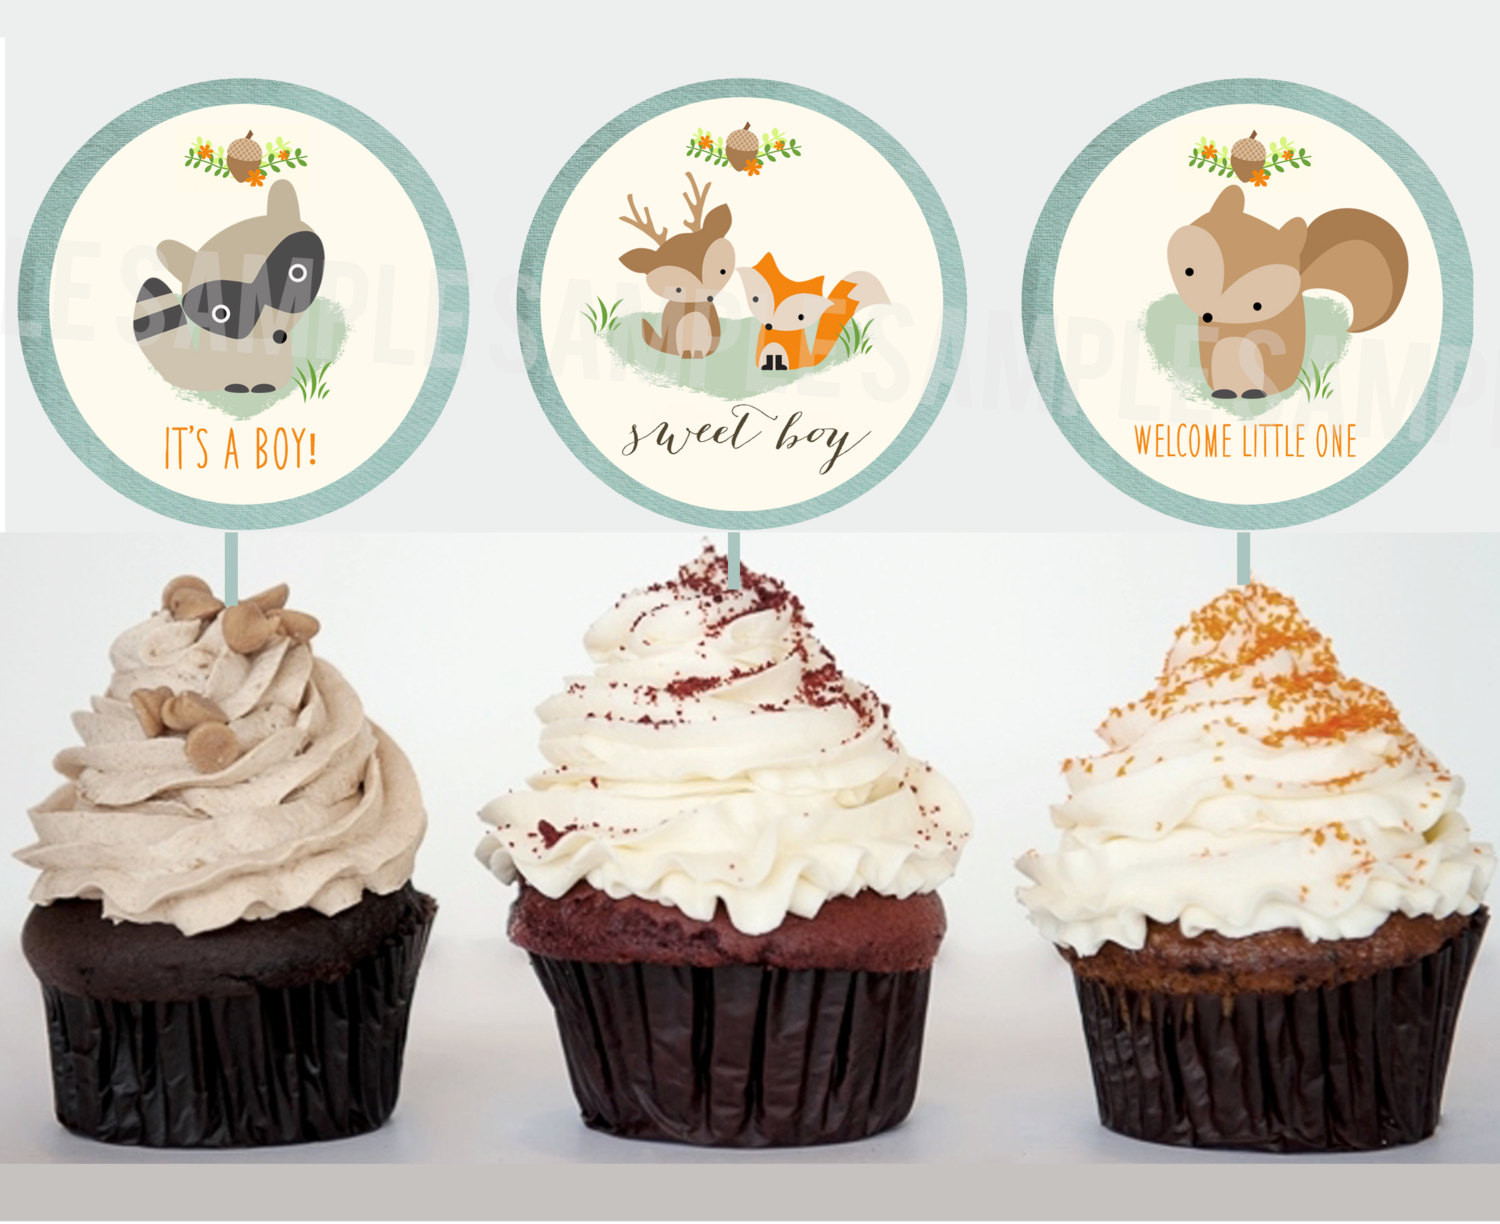 Woodland Themed Baby Shower Cupcakes
 WOODLAND Baby Shower Decorations Cupcake Toppers Printable